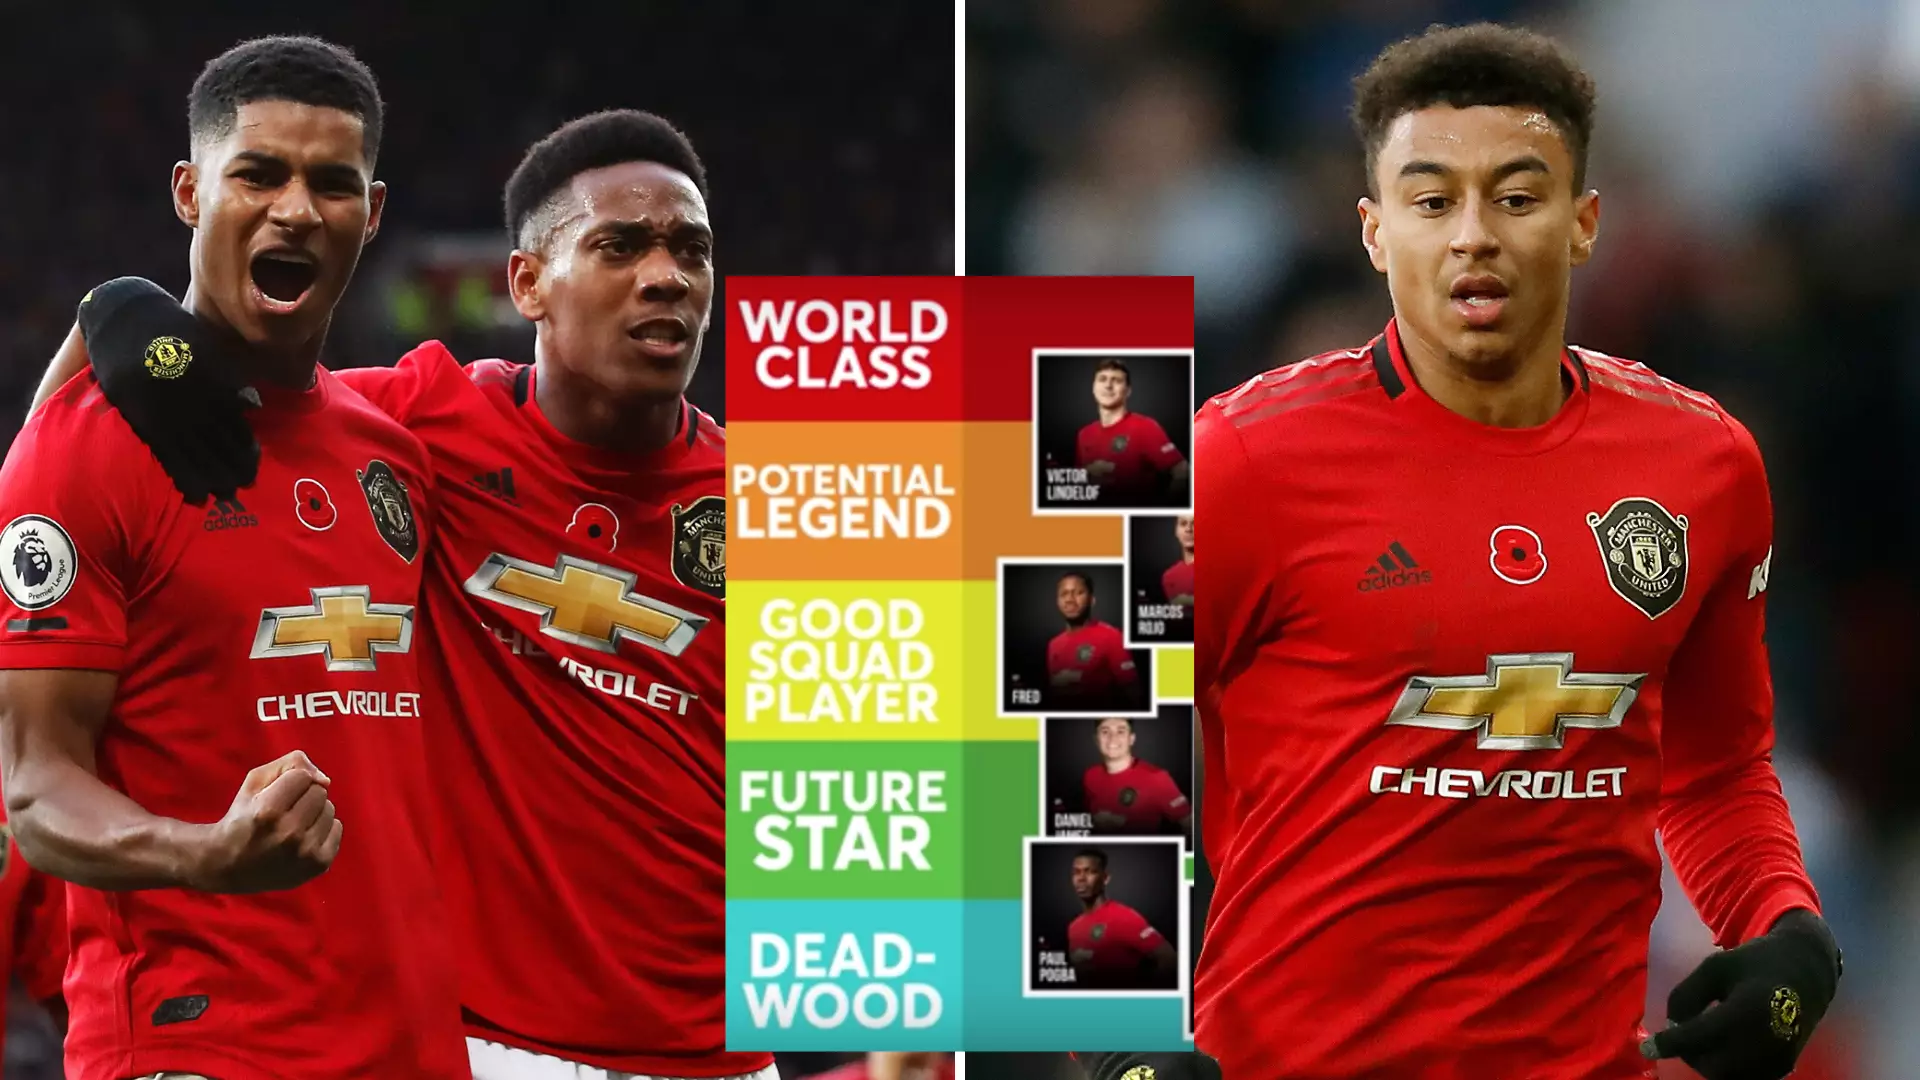 Manchester United Fans Ranked Current Squad From 'World Class' To 'Deadwood'